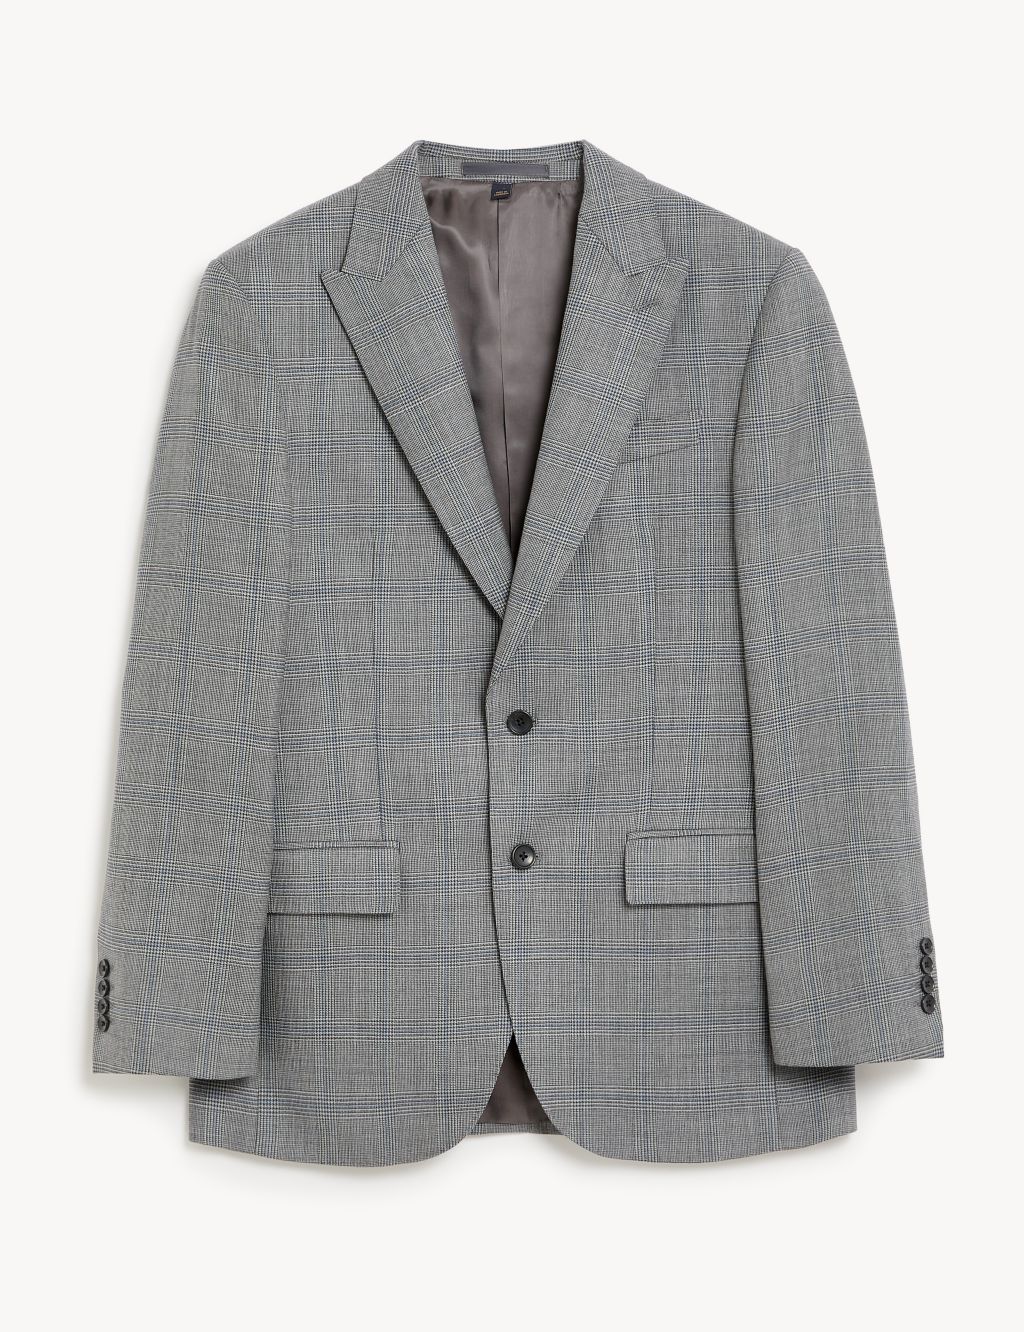 Regular Fit Pure Wool Check Suit Jacket | M&S SARTORIAL | M&S